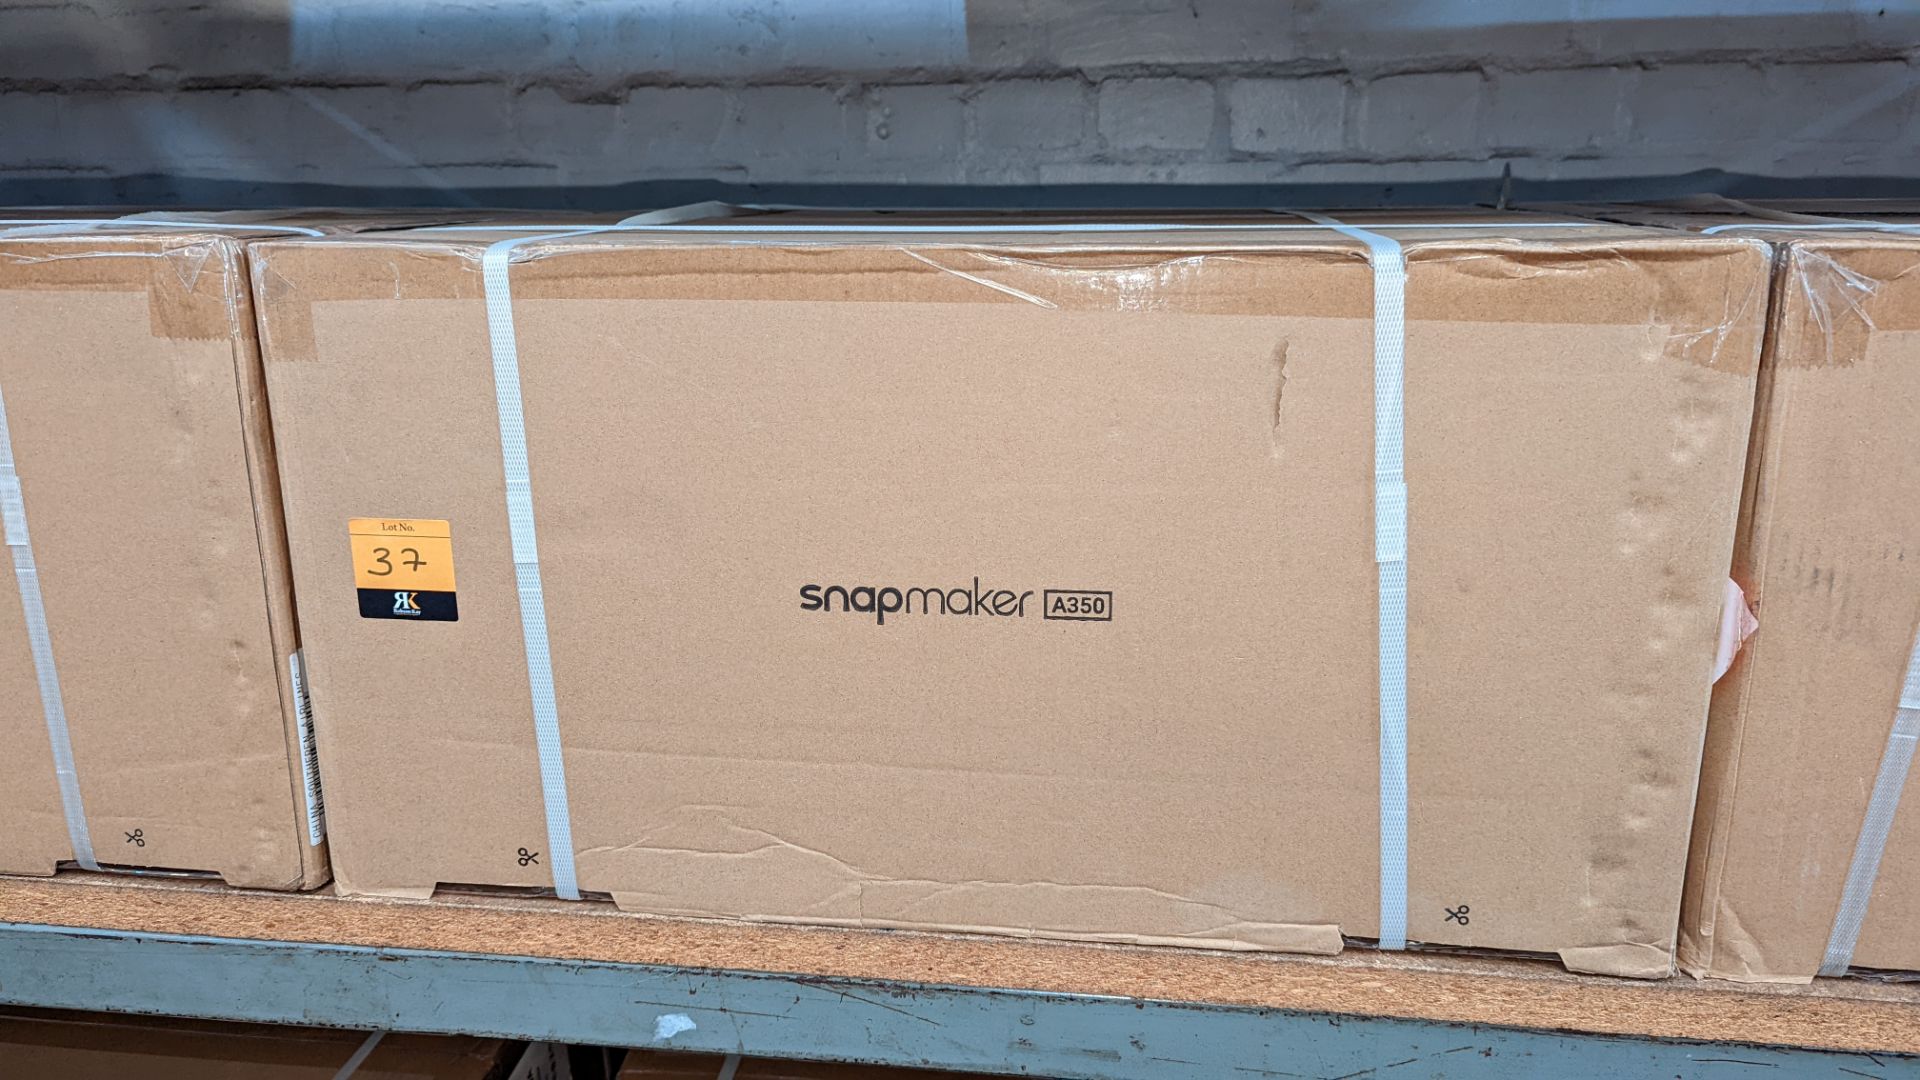 Snapmaker model A350 3D printer - boxed, delivered with original banding, assumed to be new/unused - Image 2 of 3